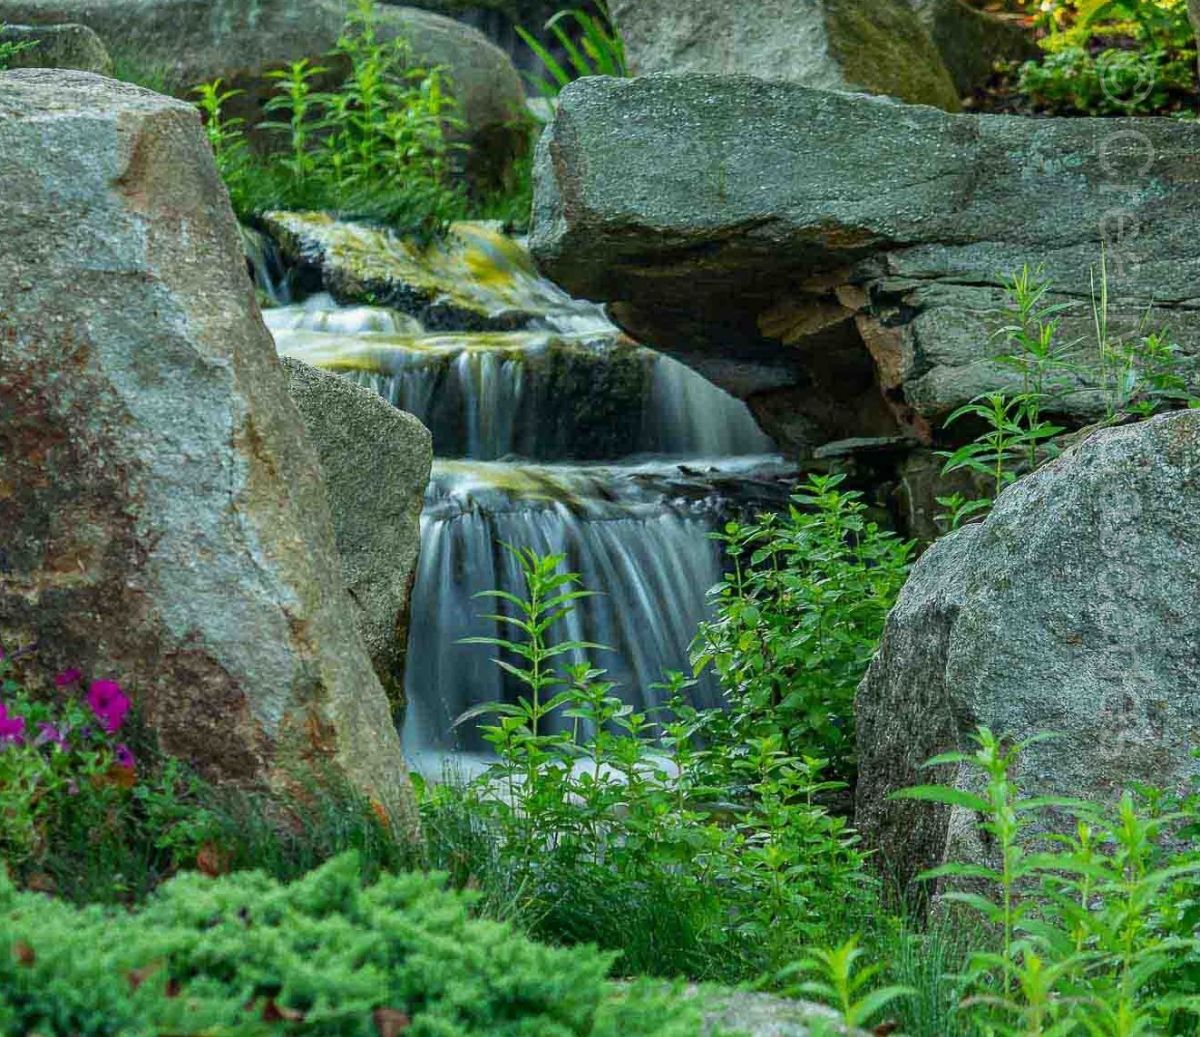 Very large green slate used in this pondless waterfall. Larger rocks look impressive but more expensive to transport & install.  - Landscaping and Water Features -  Creative Cascades